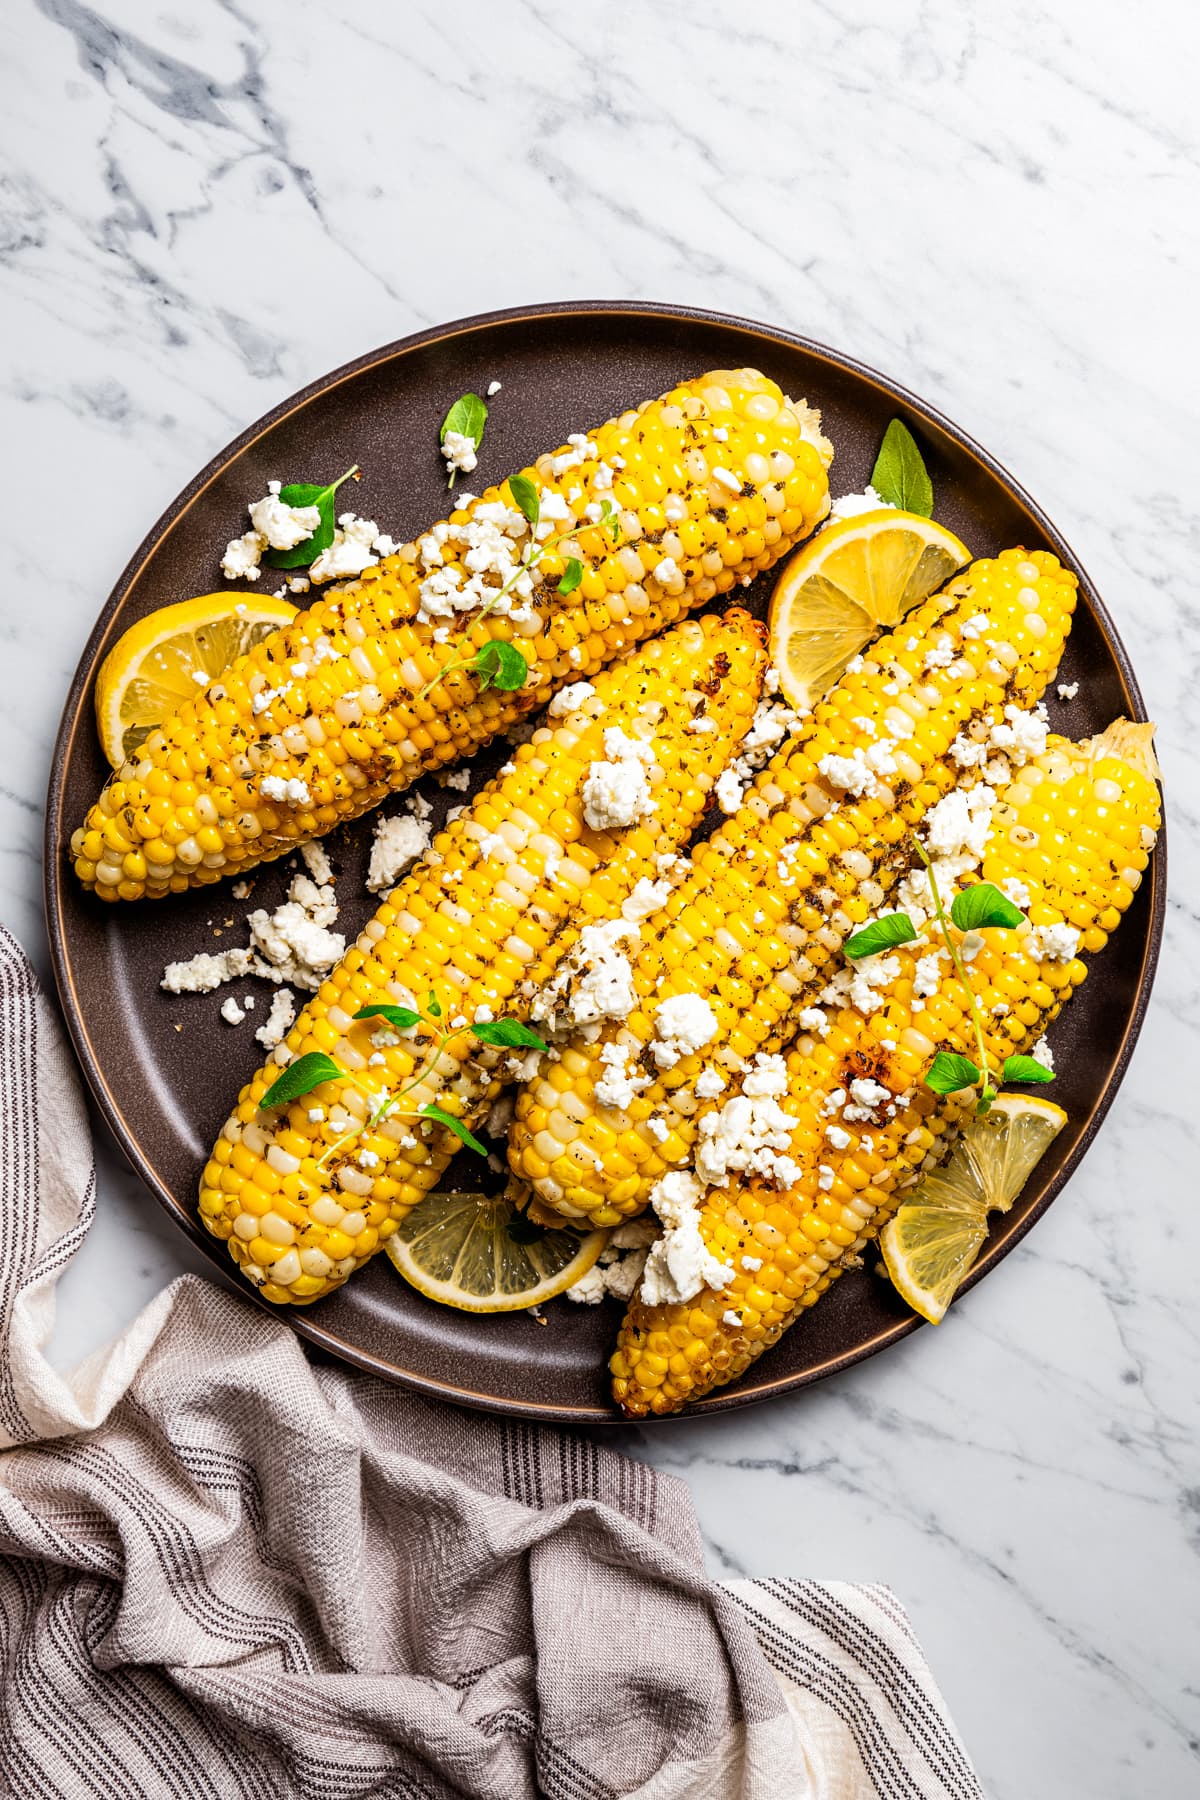 Overhead view of four ears of corn on a plate topped with goat cheese and garnished with lemon wedges.